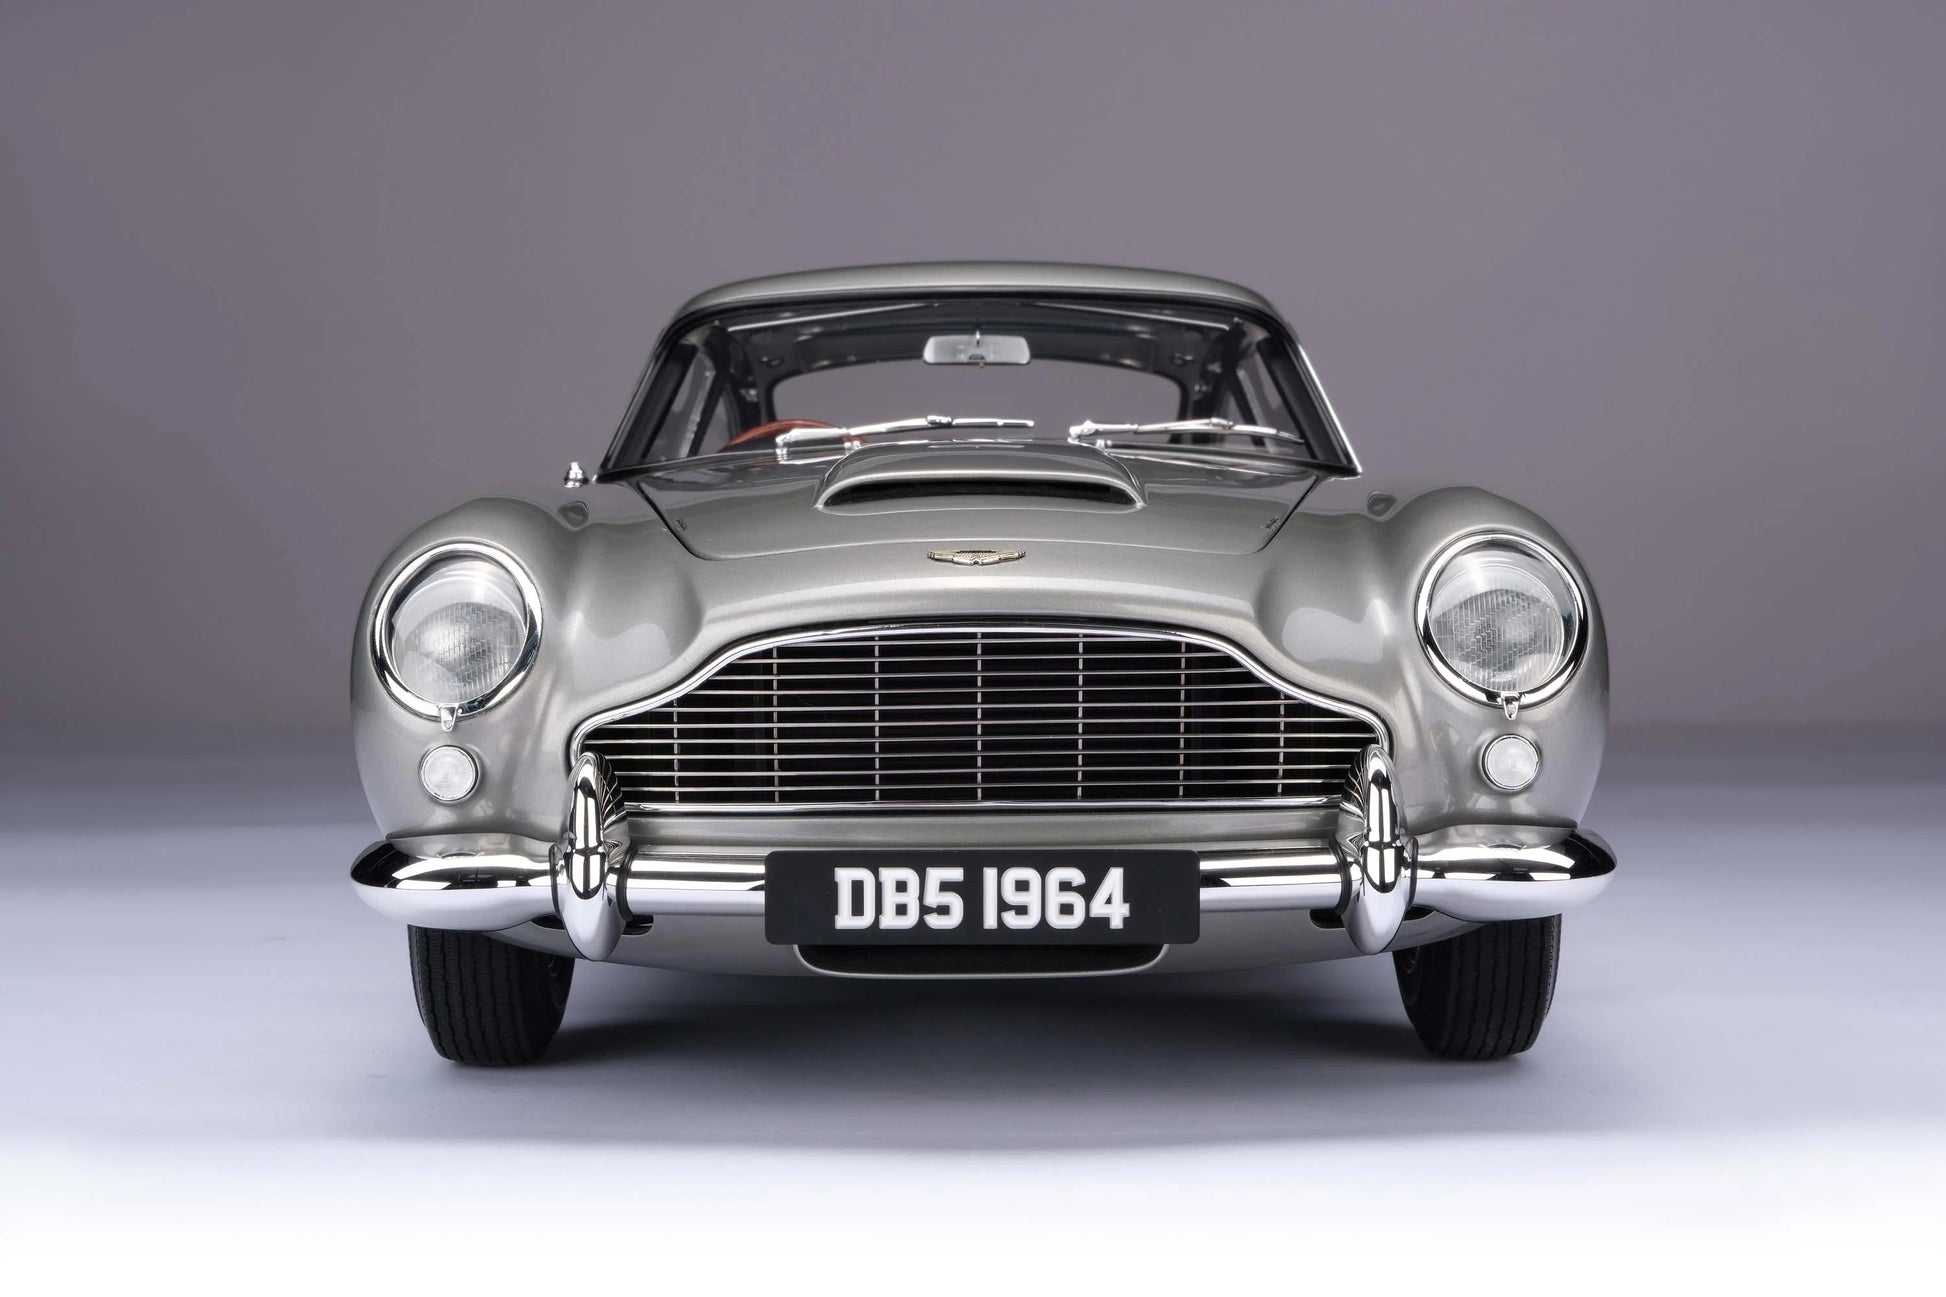 Amalgam Collection Aston Martin DB5 Limited Edition 1:8 Model Car | Exquisite Collector's Piece, Detailed Replica of Iconic Vehicle | 2Jour Concierge, #1 luxury high-end gift & lifestyle shop